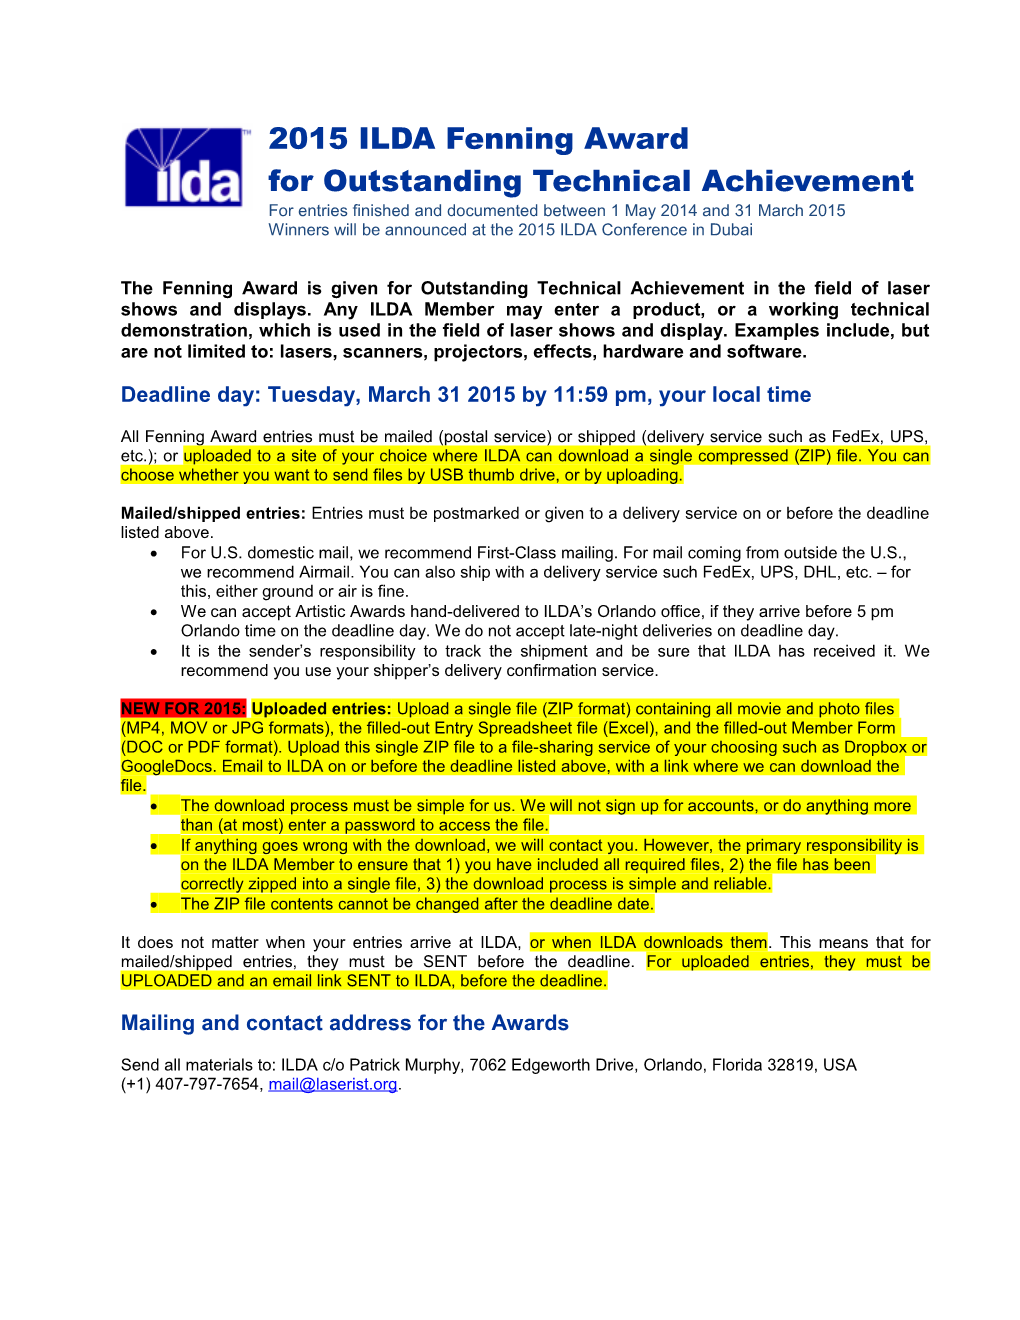 ILDA Tech Awards - Rules and Entry Form